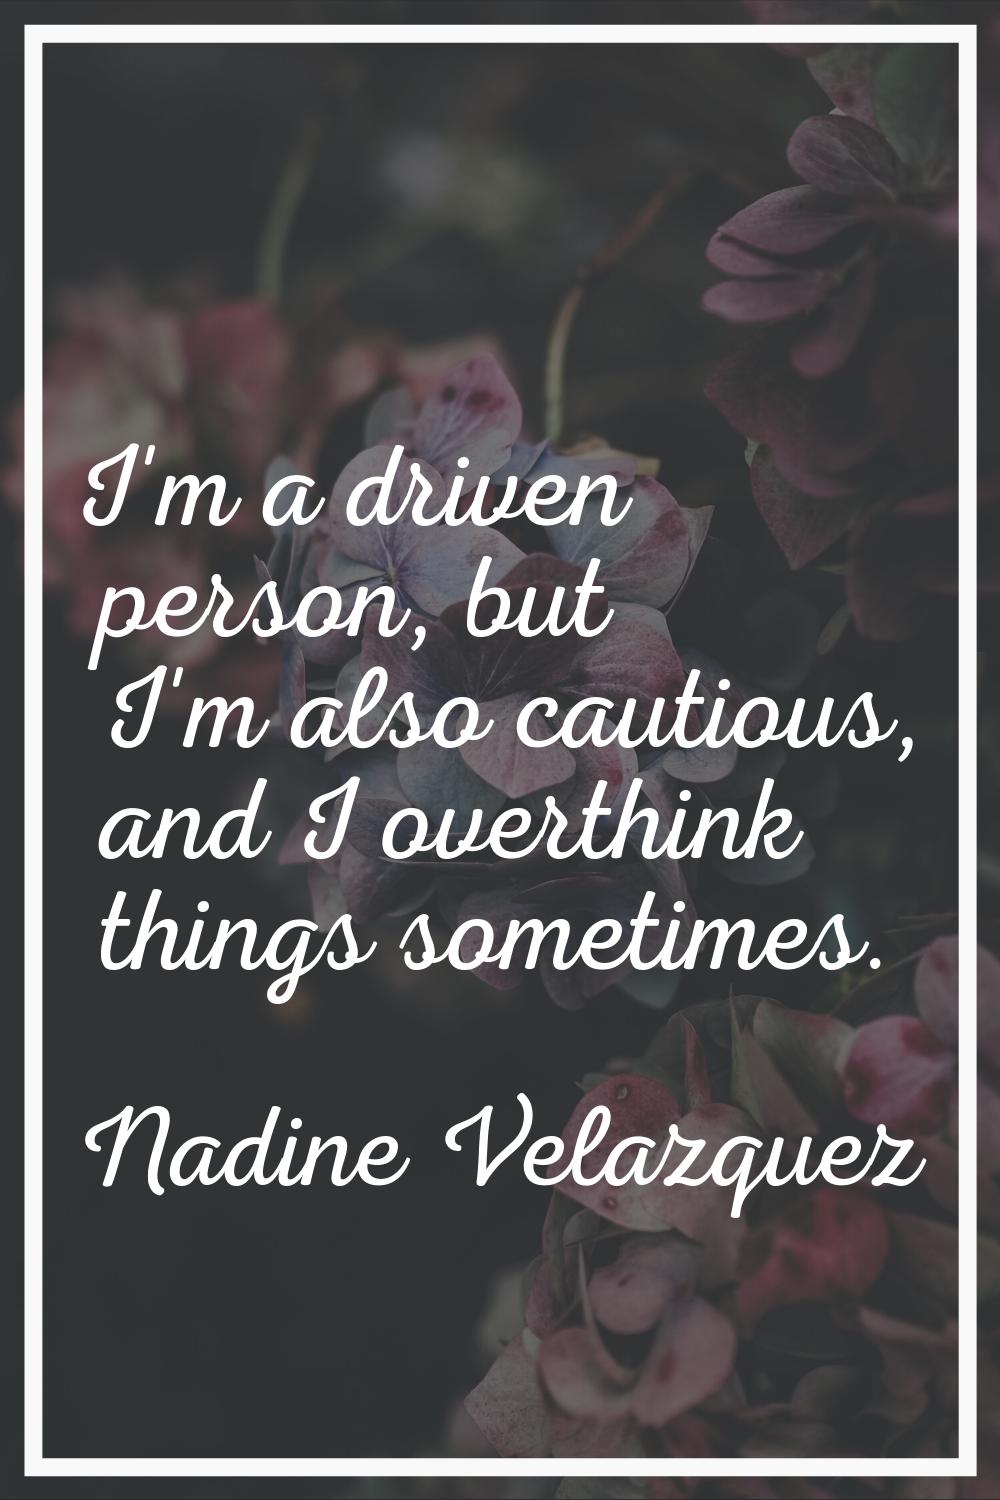 I'm a driven person, but I'm also cautious, and I overthink things sometimes.